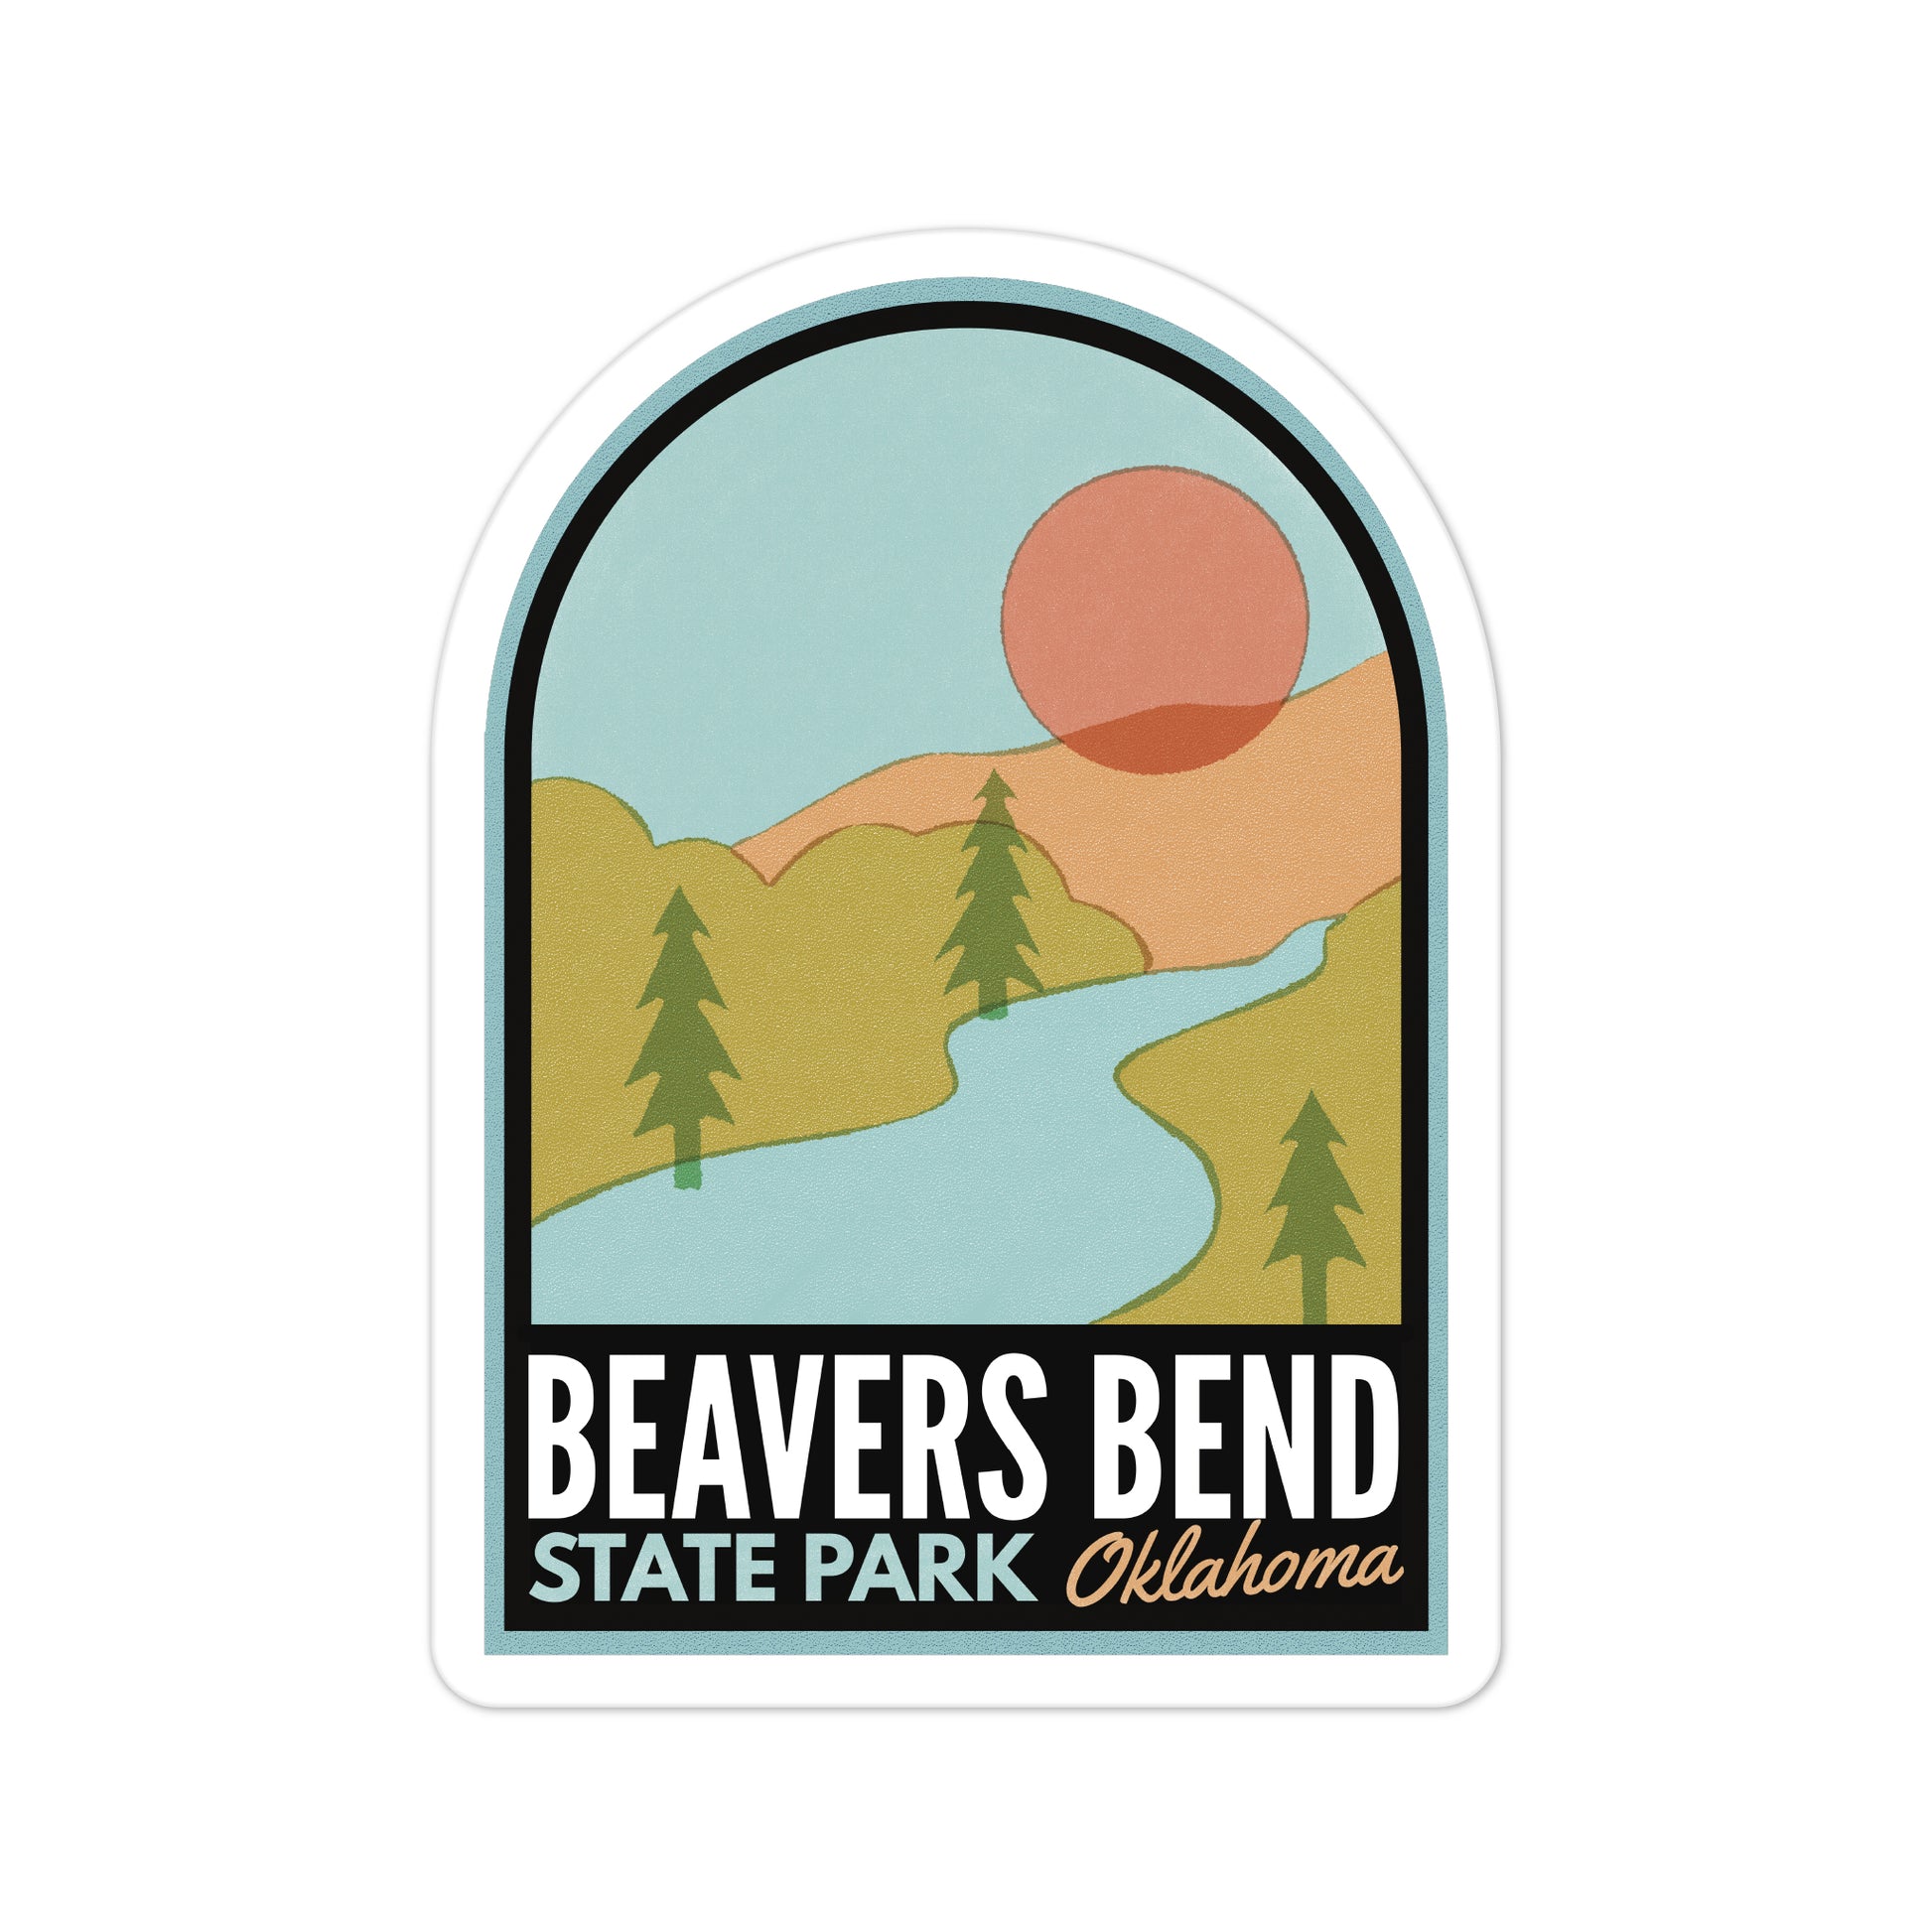 A sticker of Beavers Bend State Park